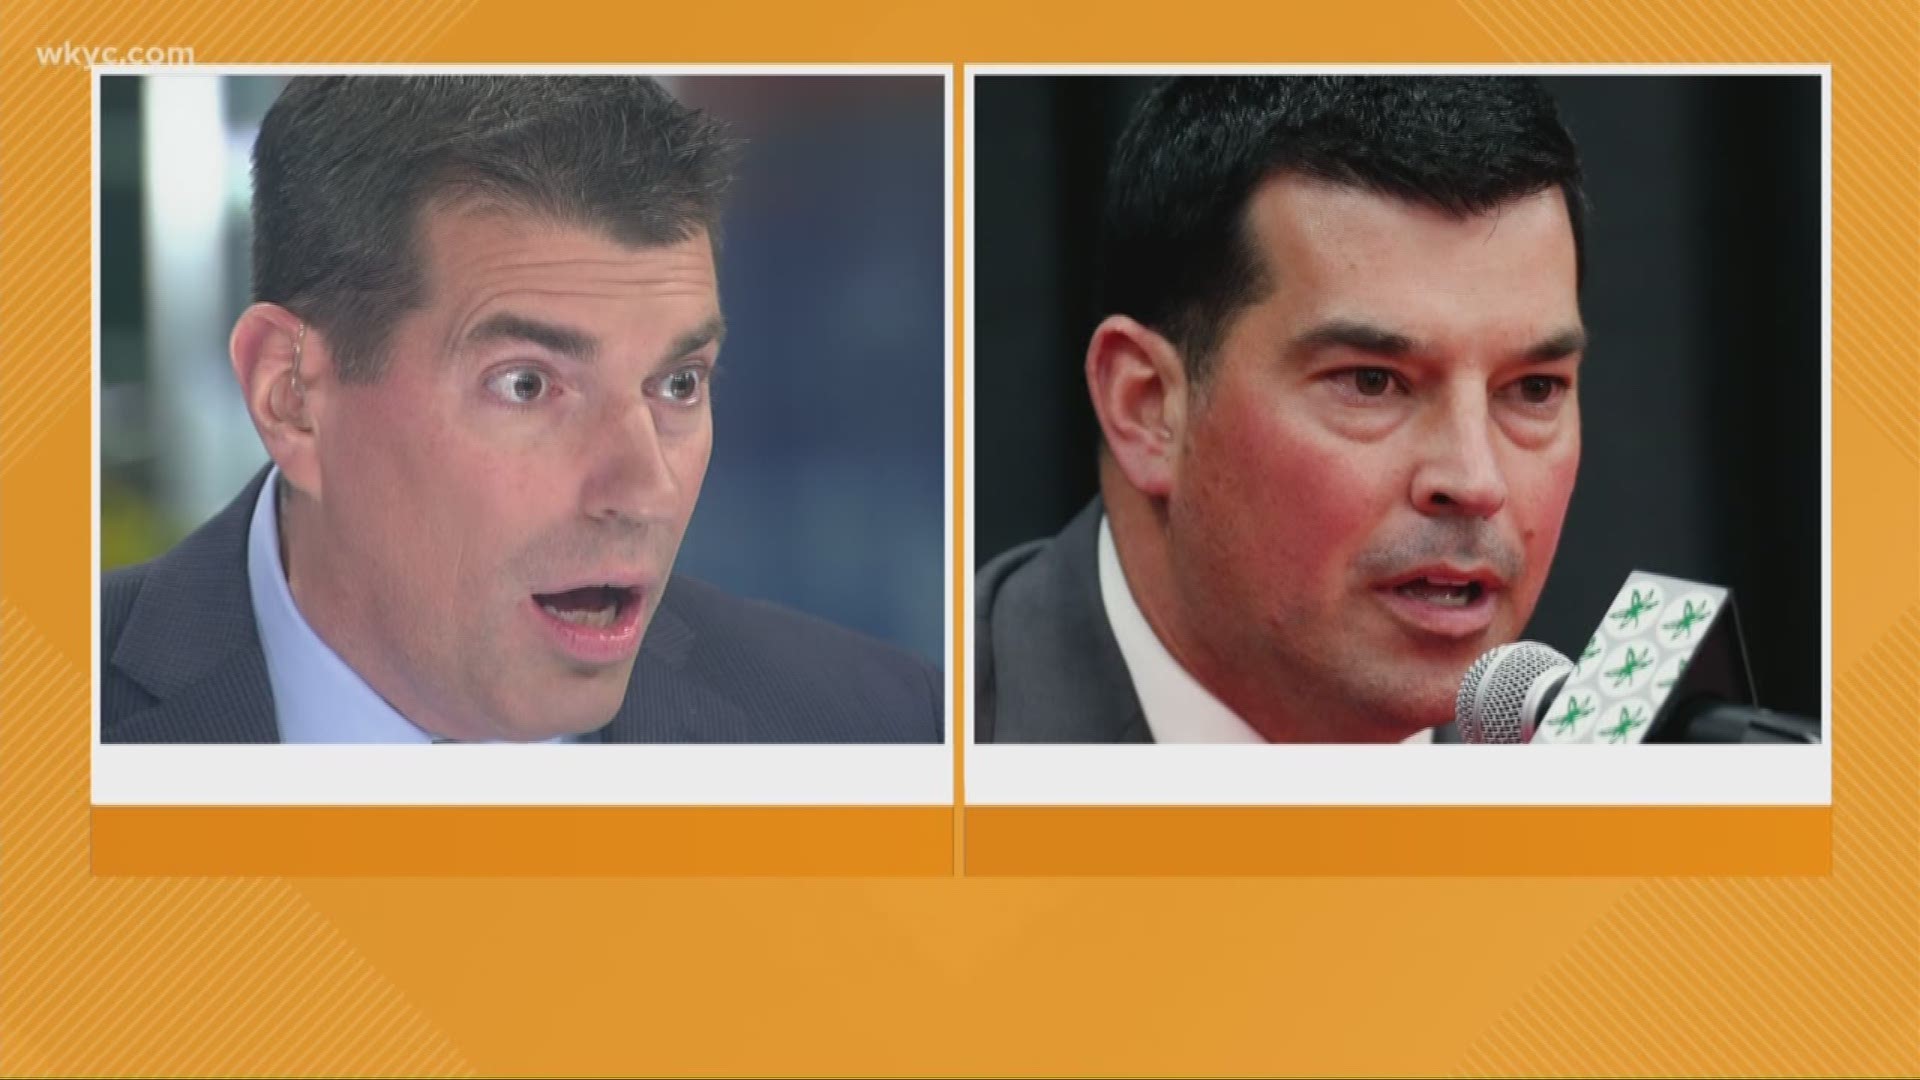 Dec. 5, 2018: Wait. Is that Dave Chudowsky or Ohio State coach Ryan Day? The two truly look so much alike.